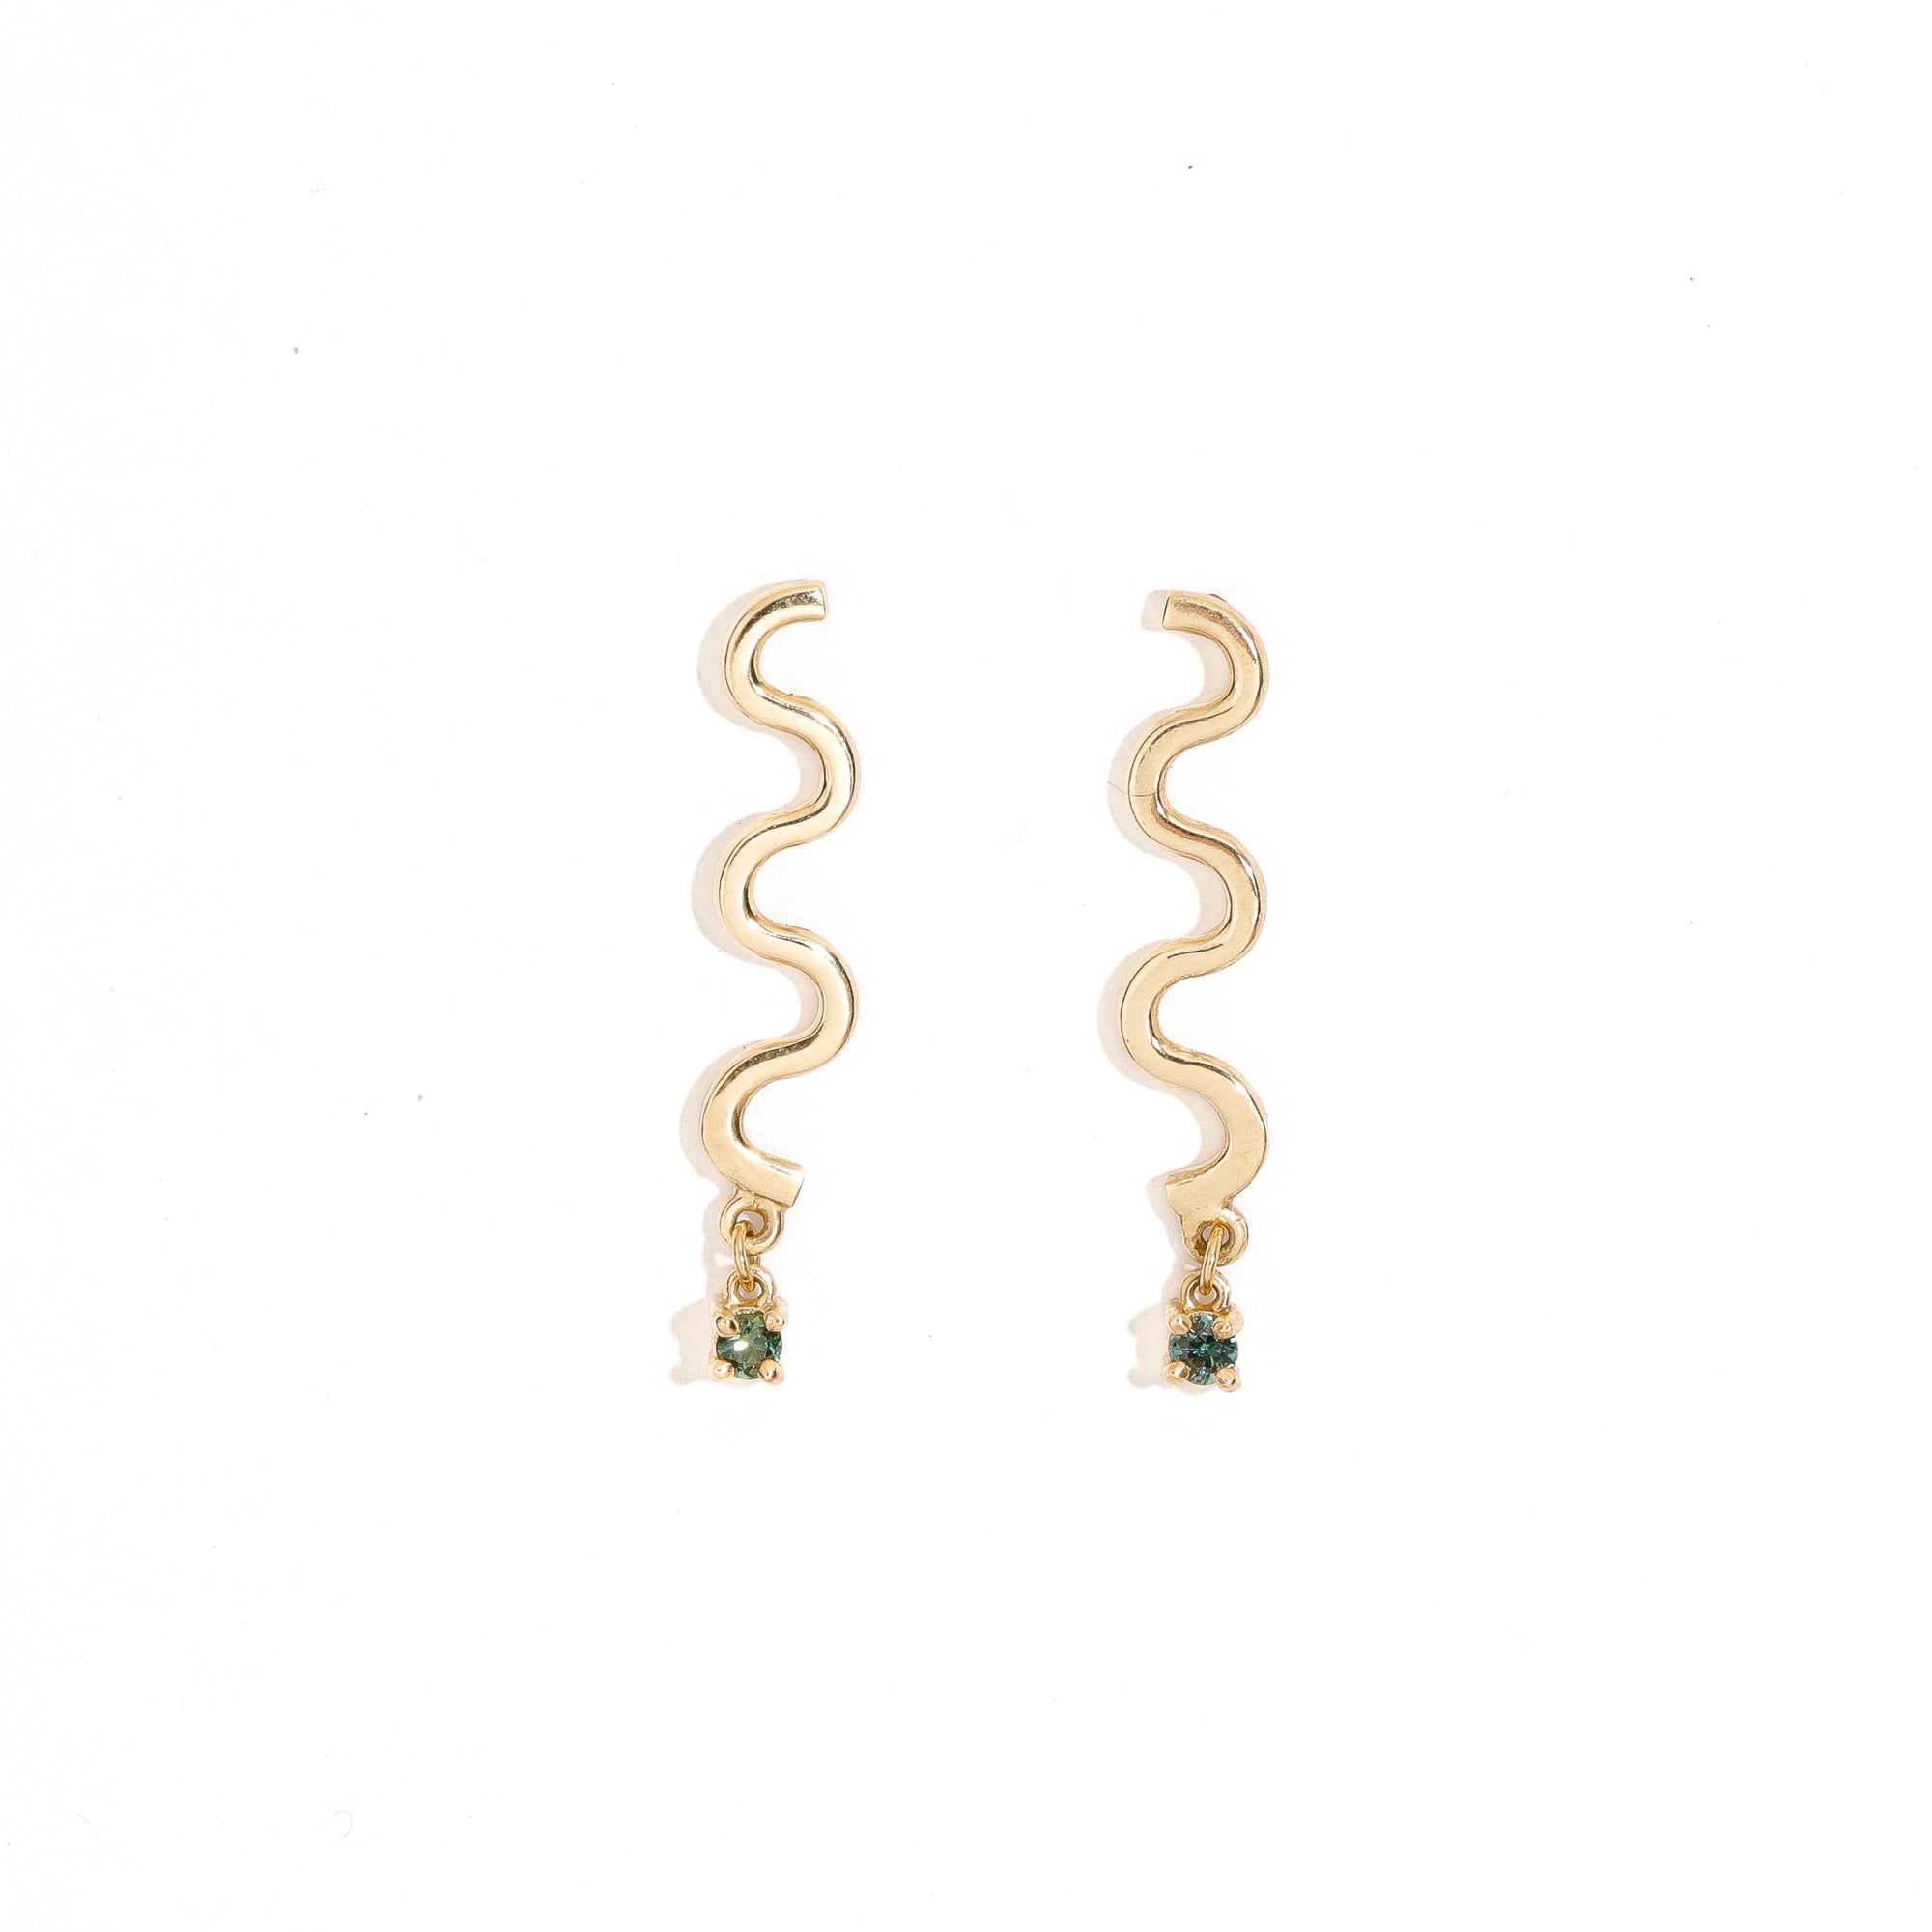 9ct yellow gold long spiral stud earring with teal sapphire drop